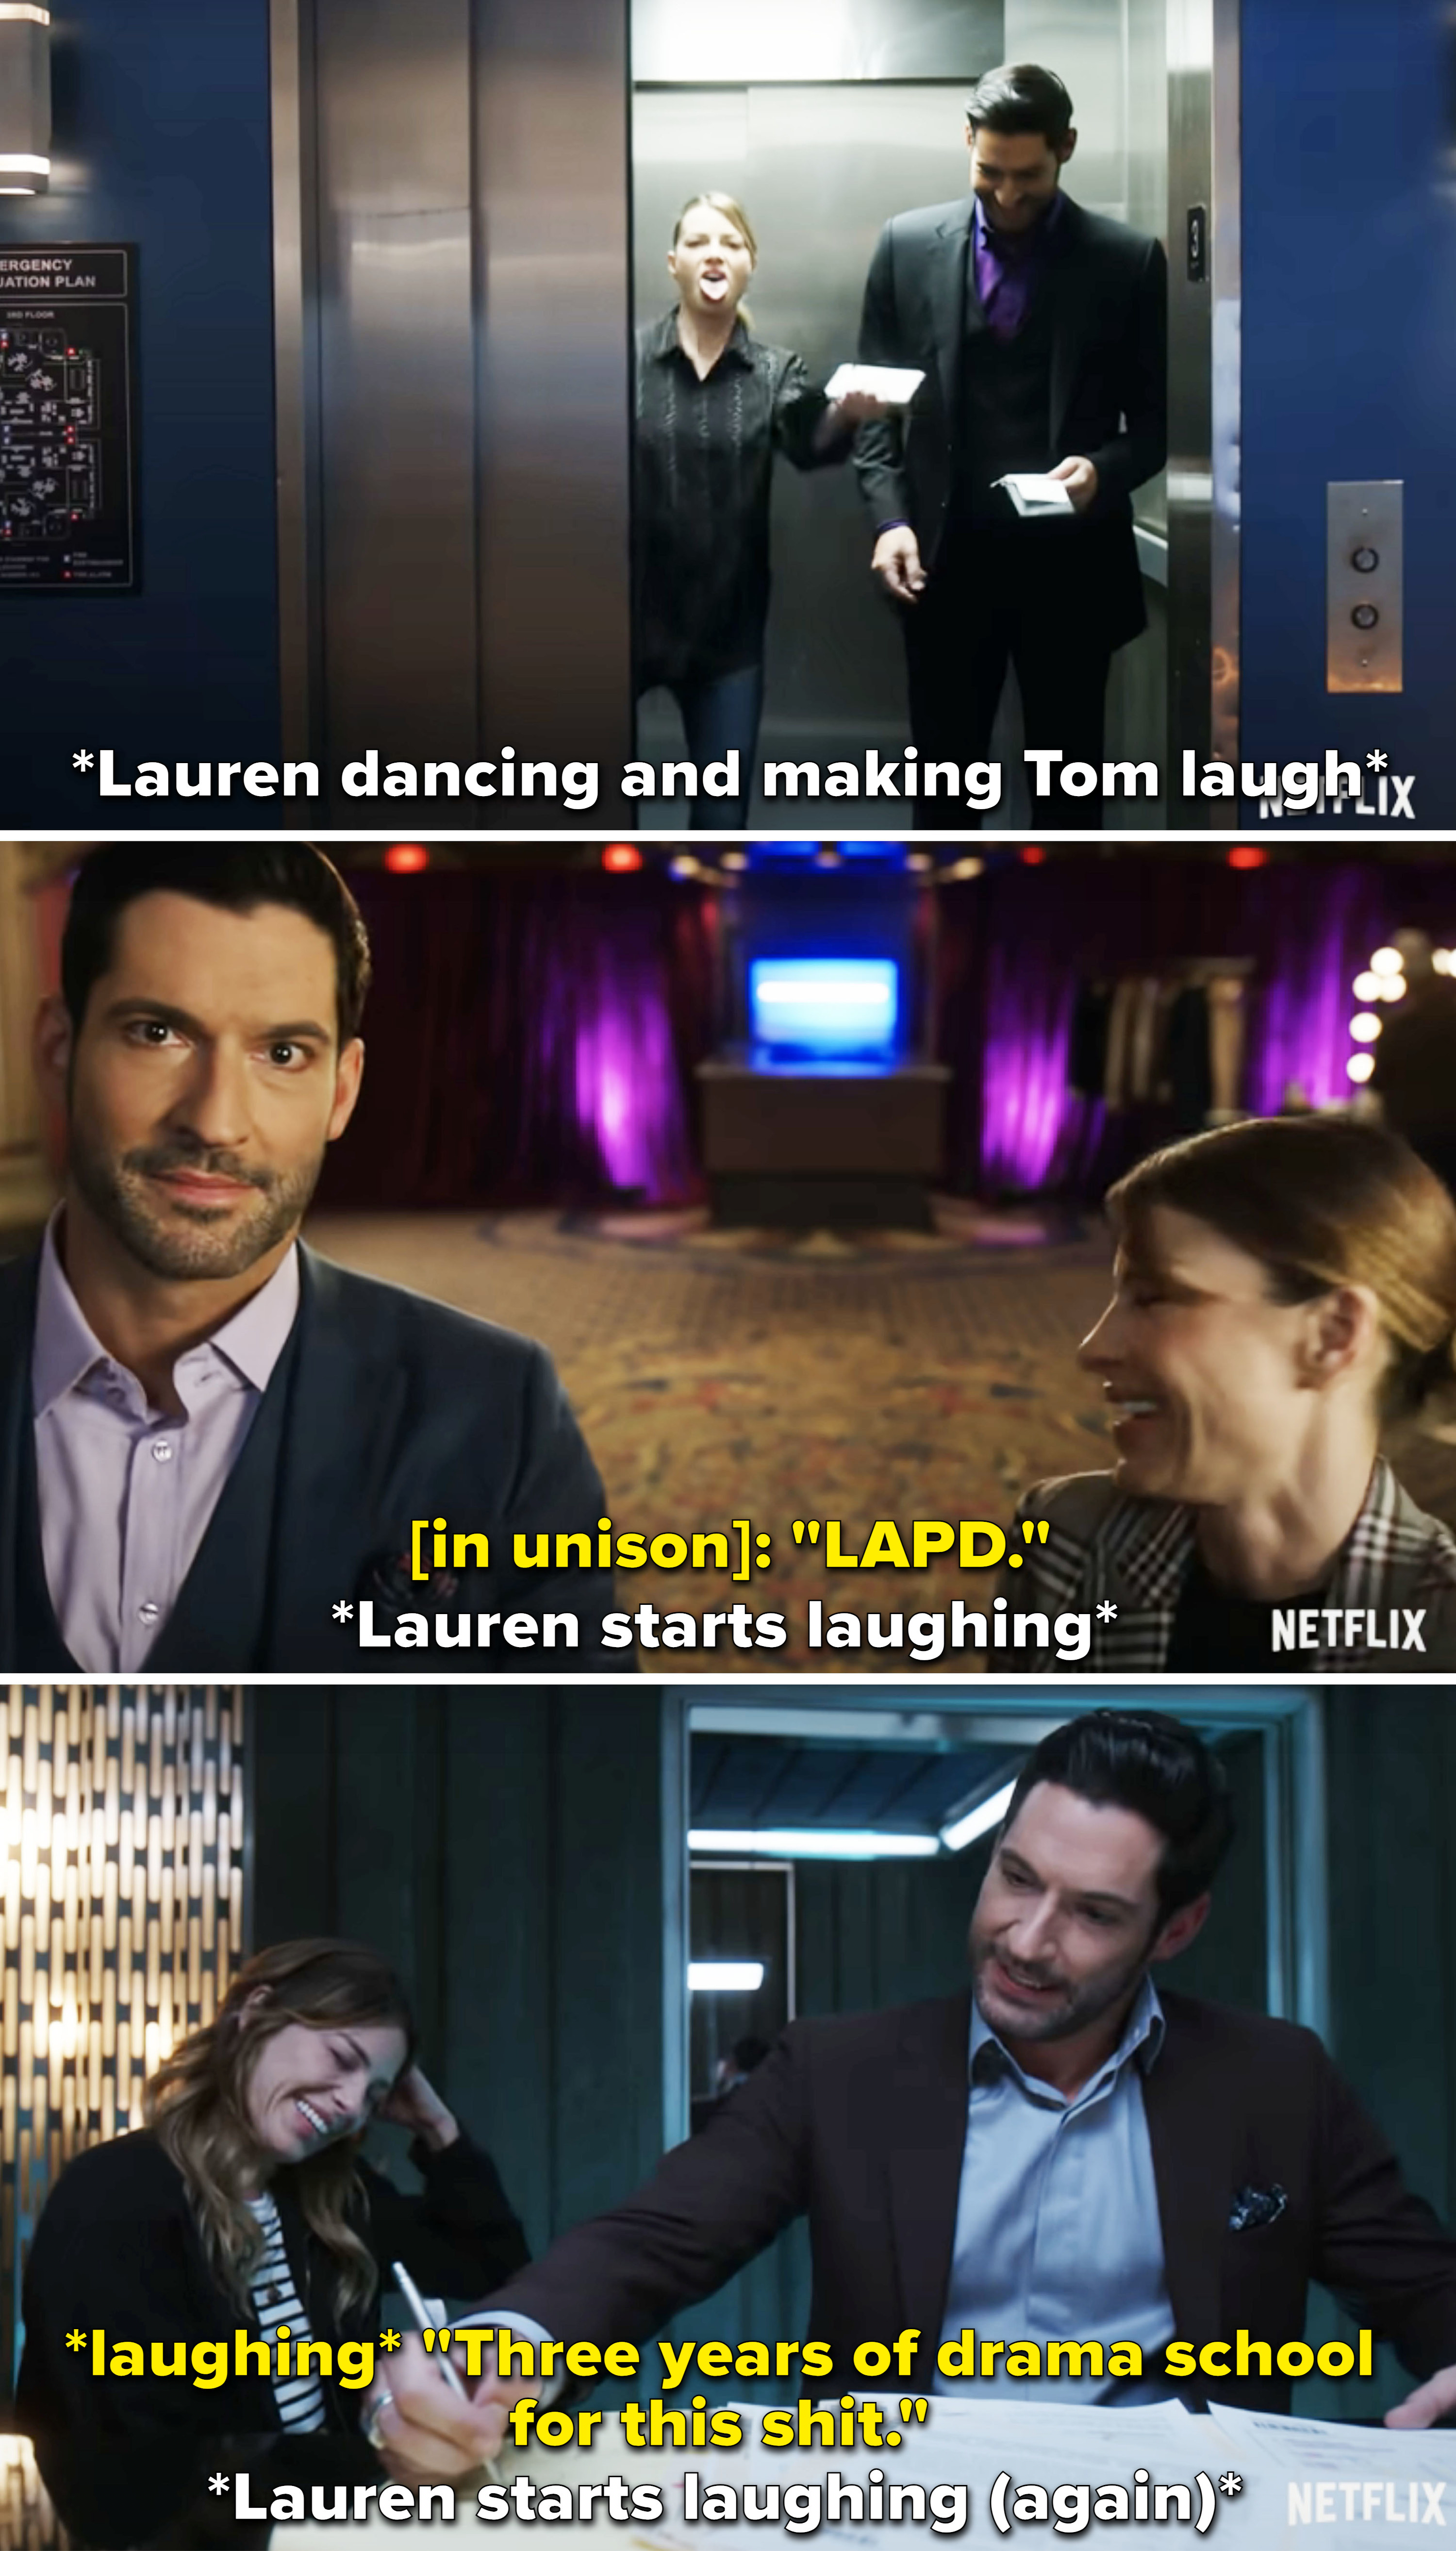 Tom and Lauren talking and laughing together